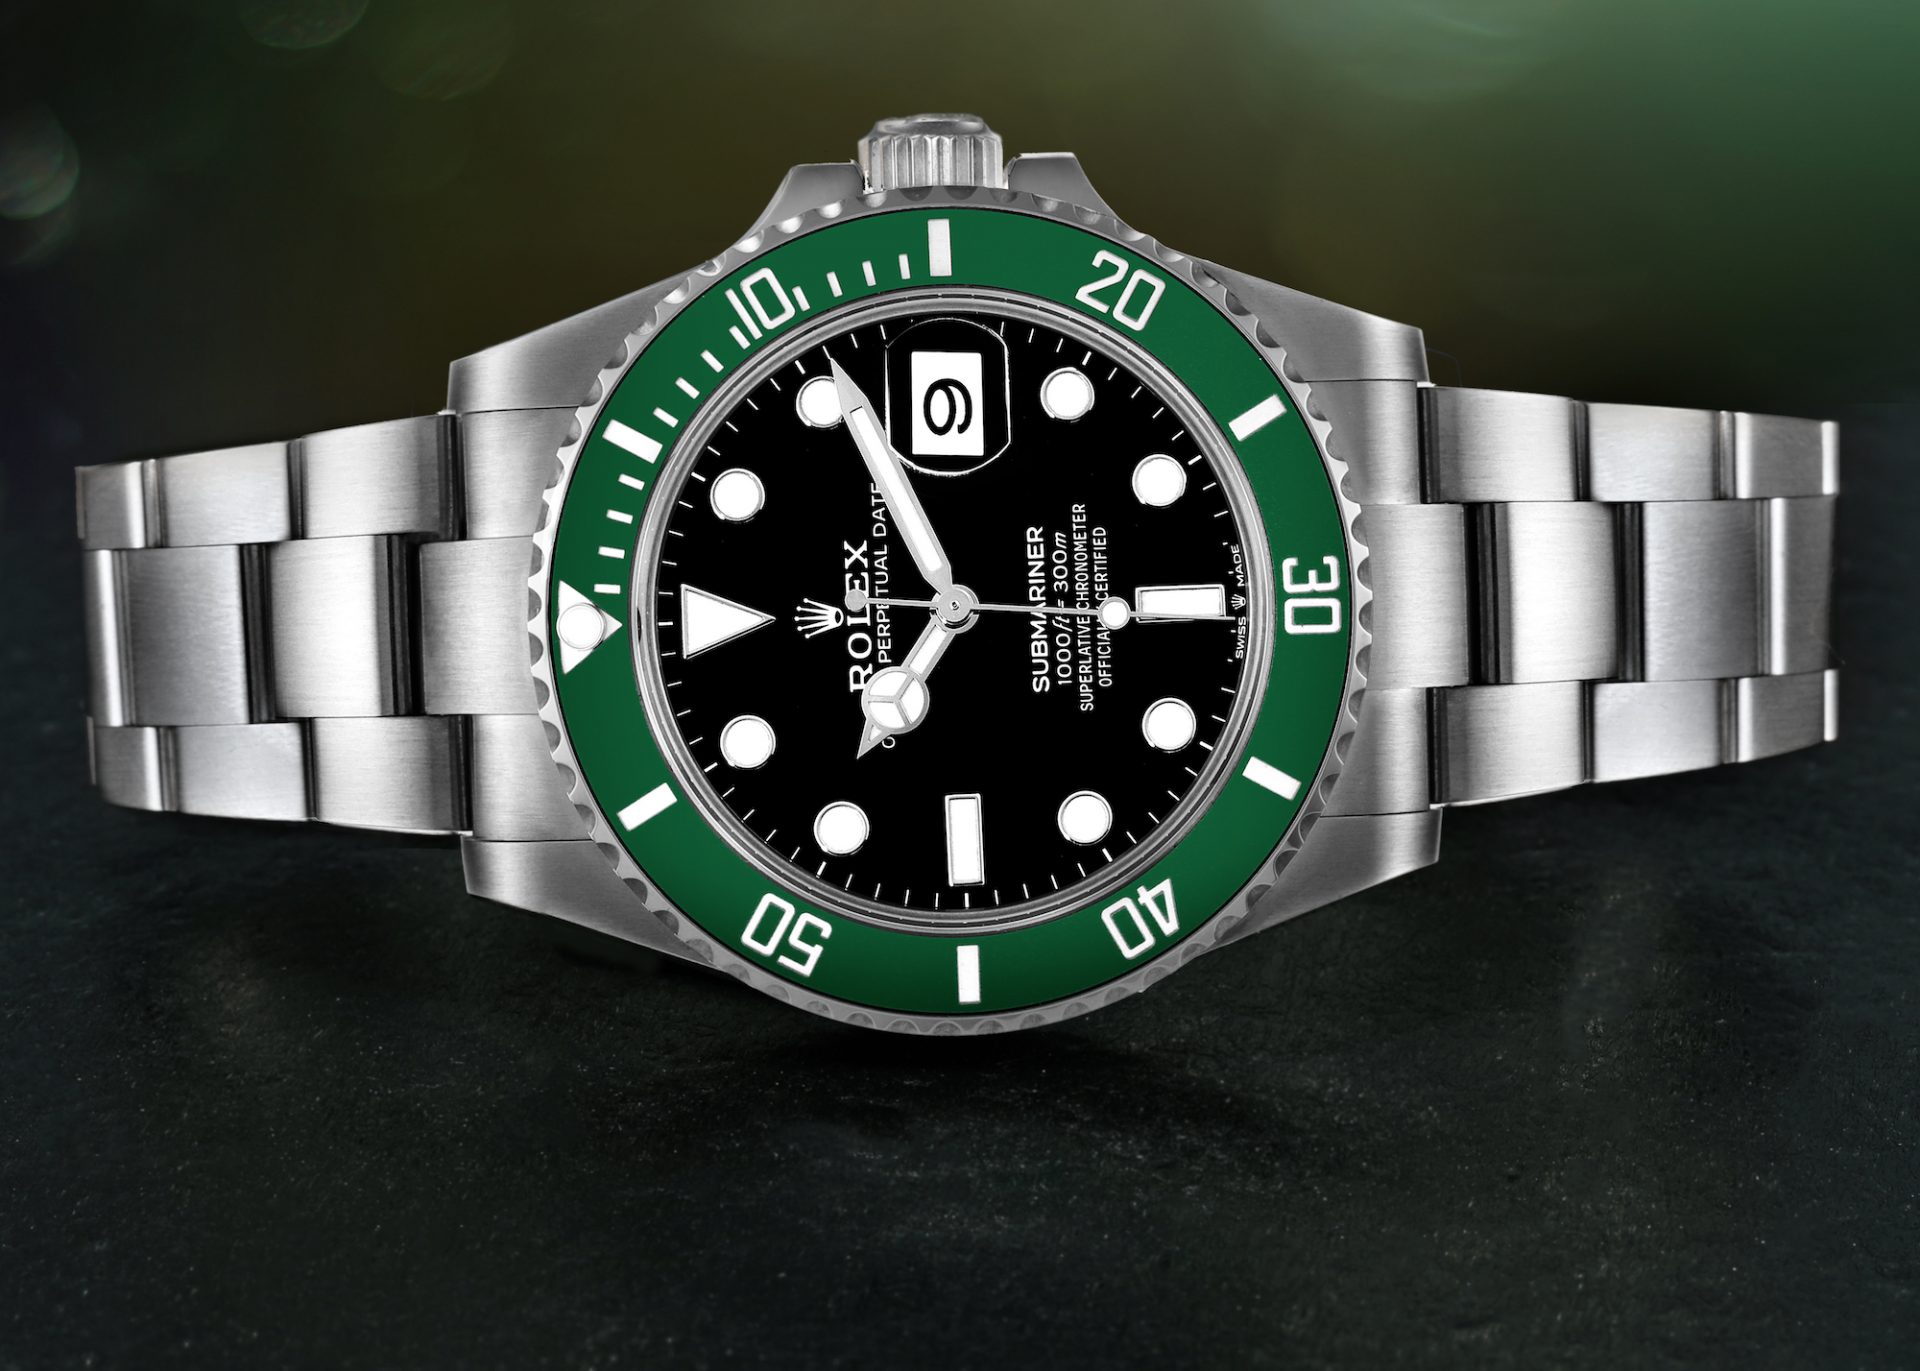 Rolex Submariner Guide For Collectors